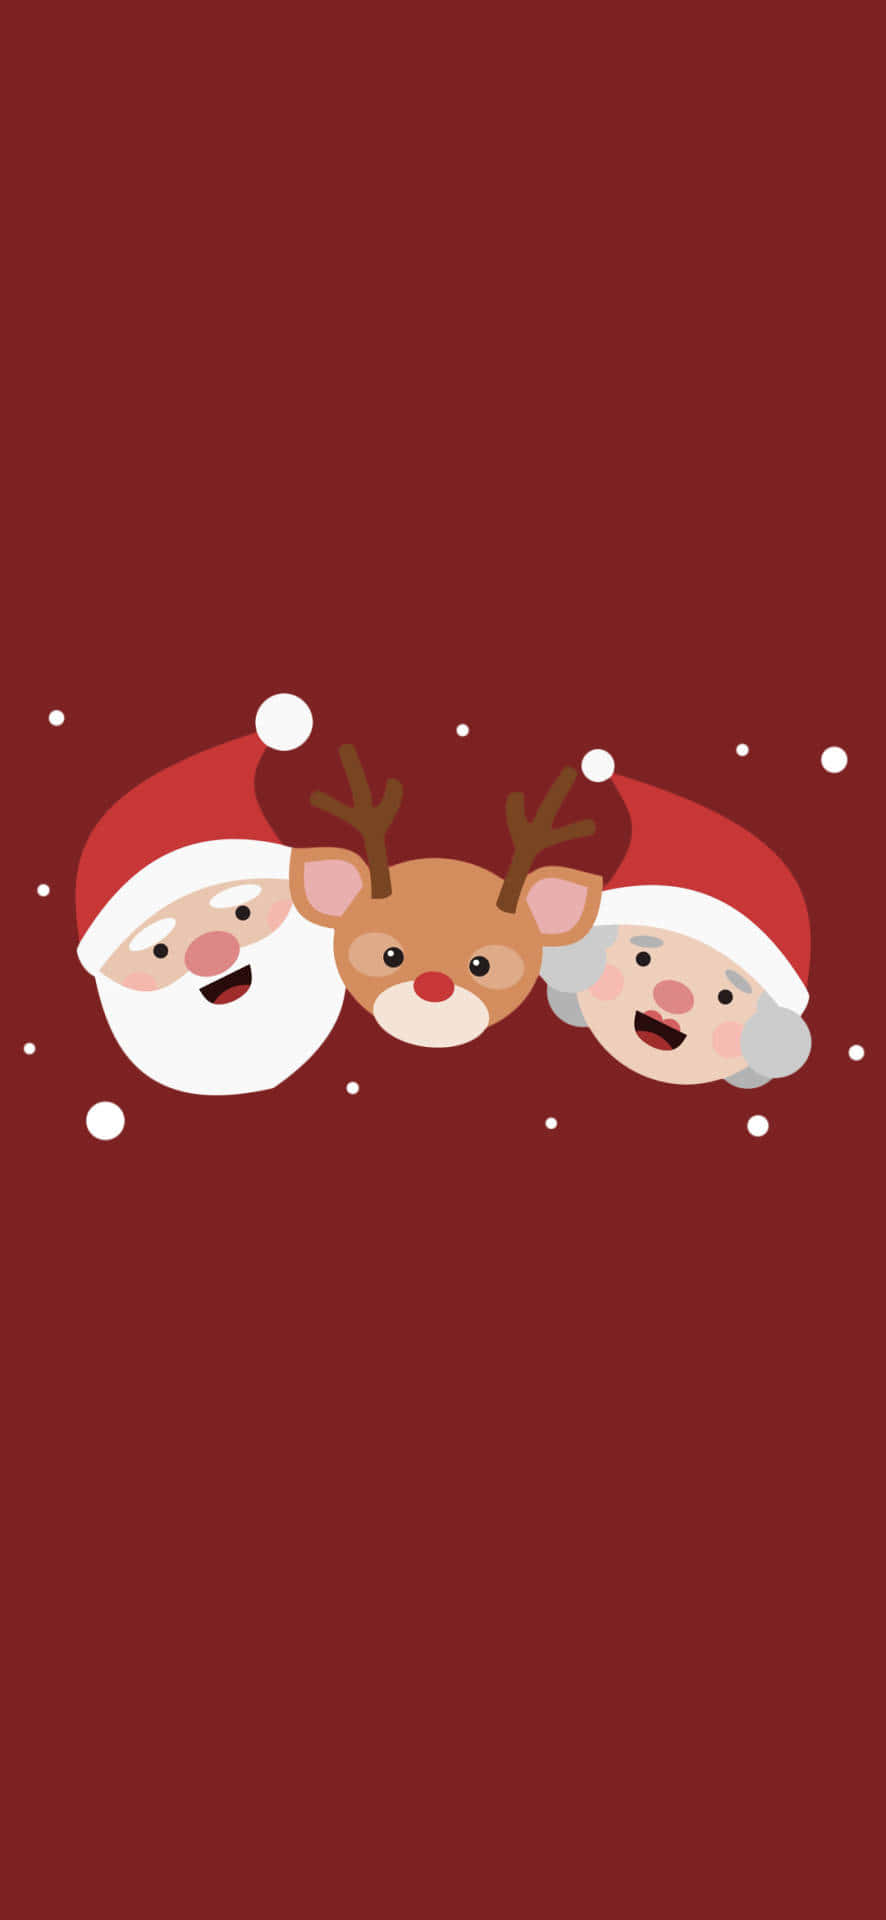 Christmas Is Best Spent with Friends Wallpaper